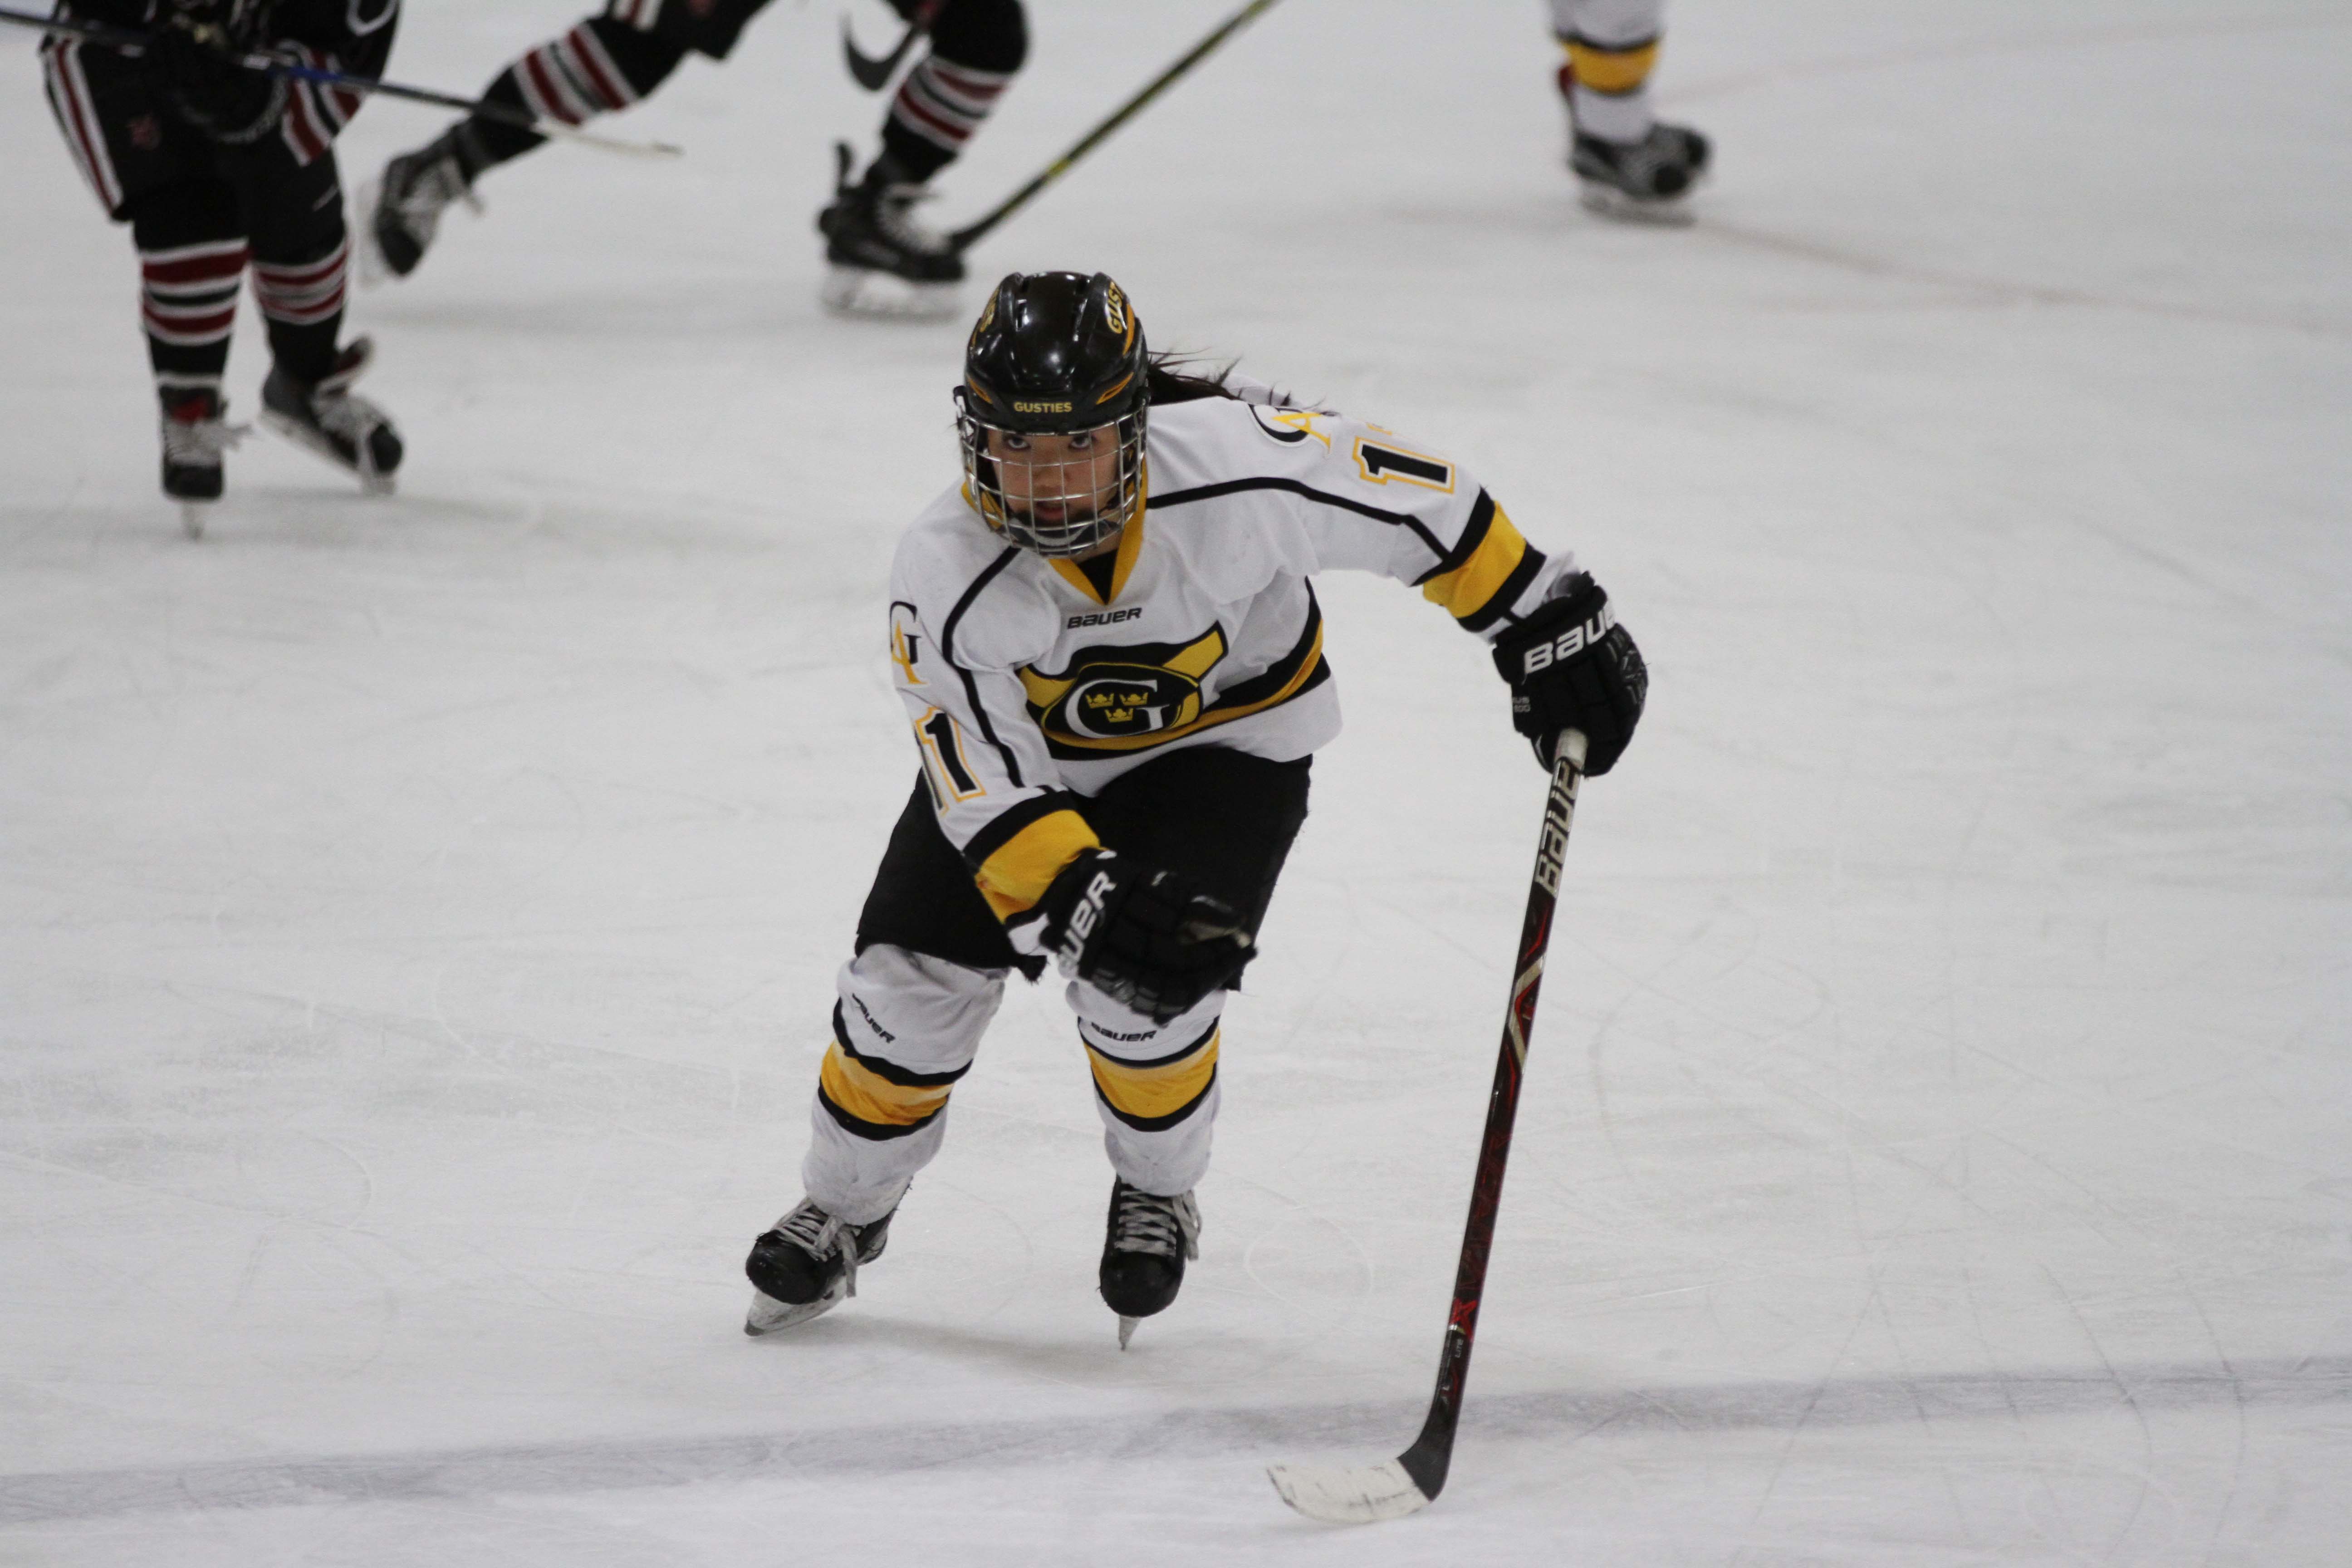 Junior Captain Amelia Vosen competes in a game last season. The Gusties have high expectations for their season, coming in at No. 8 in the preseason poll.